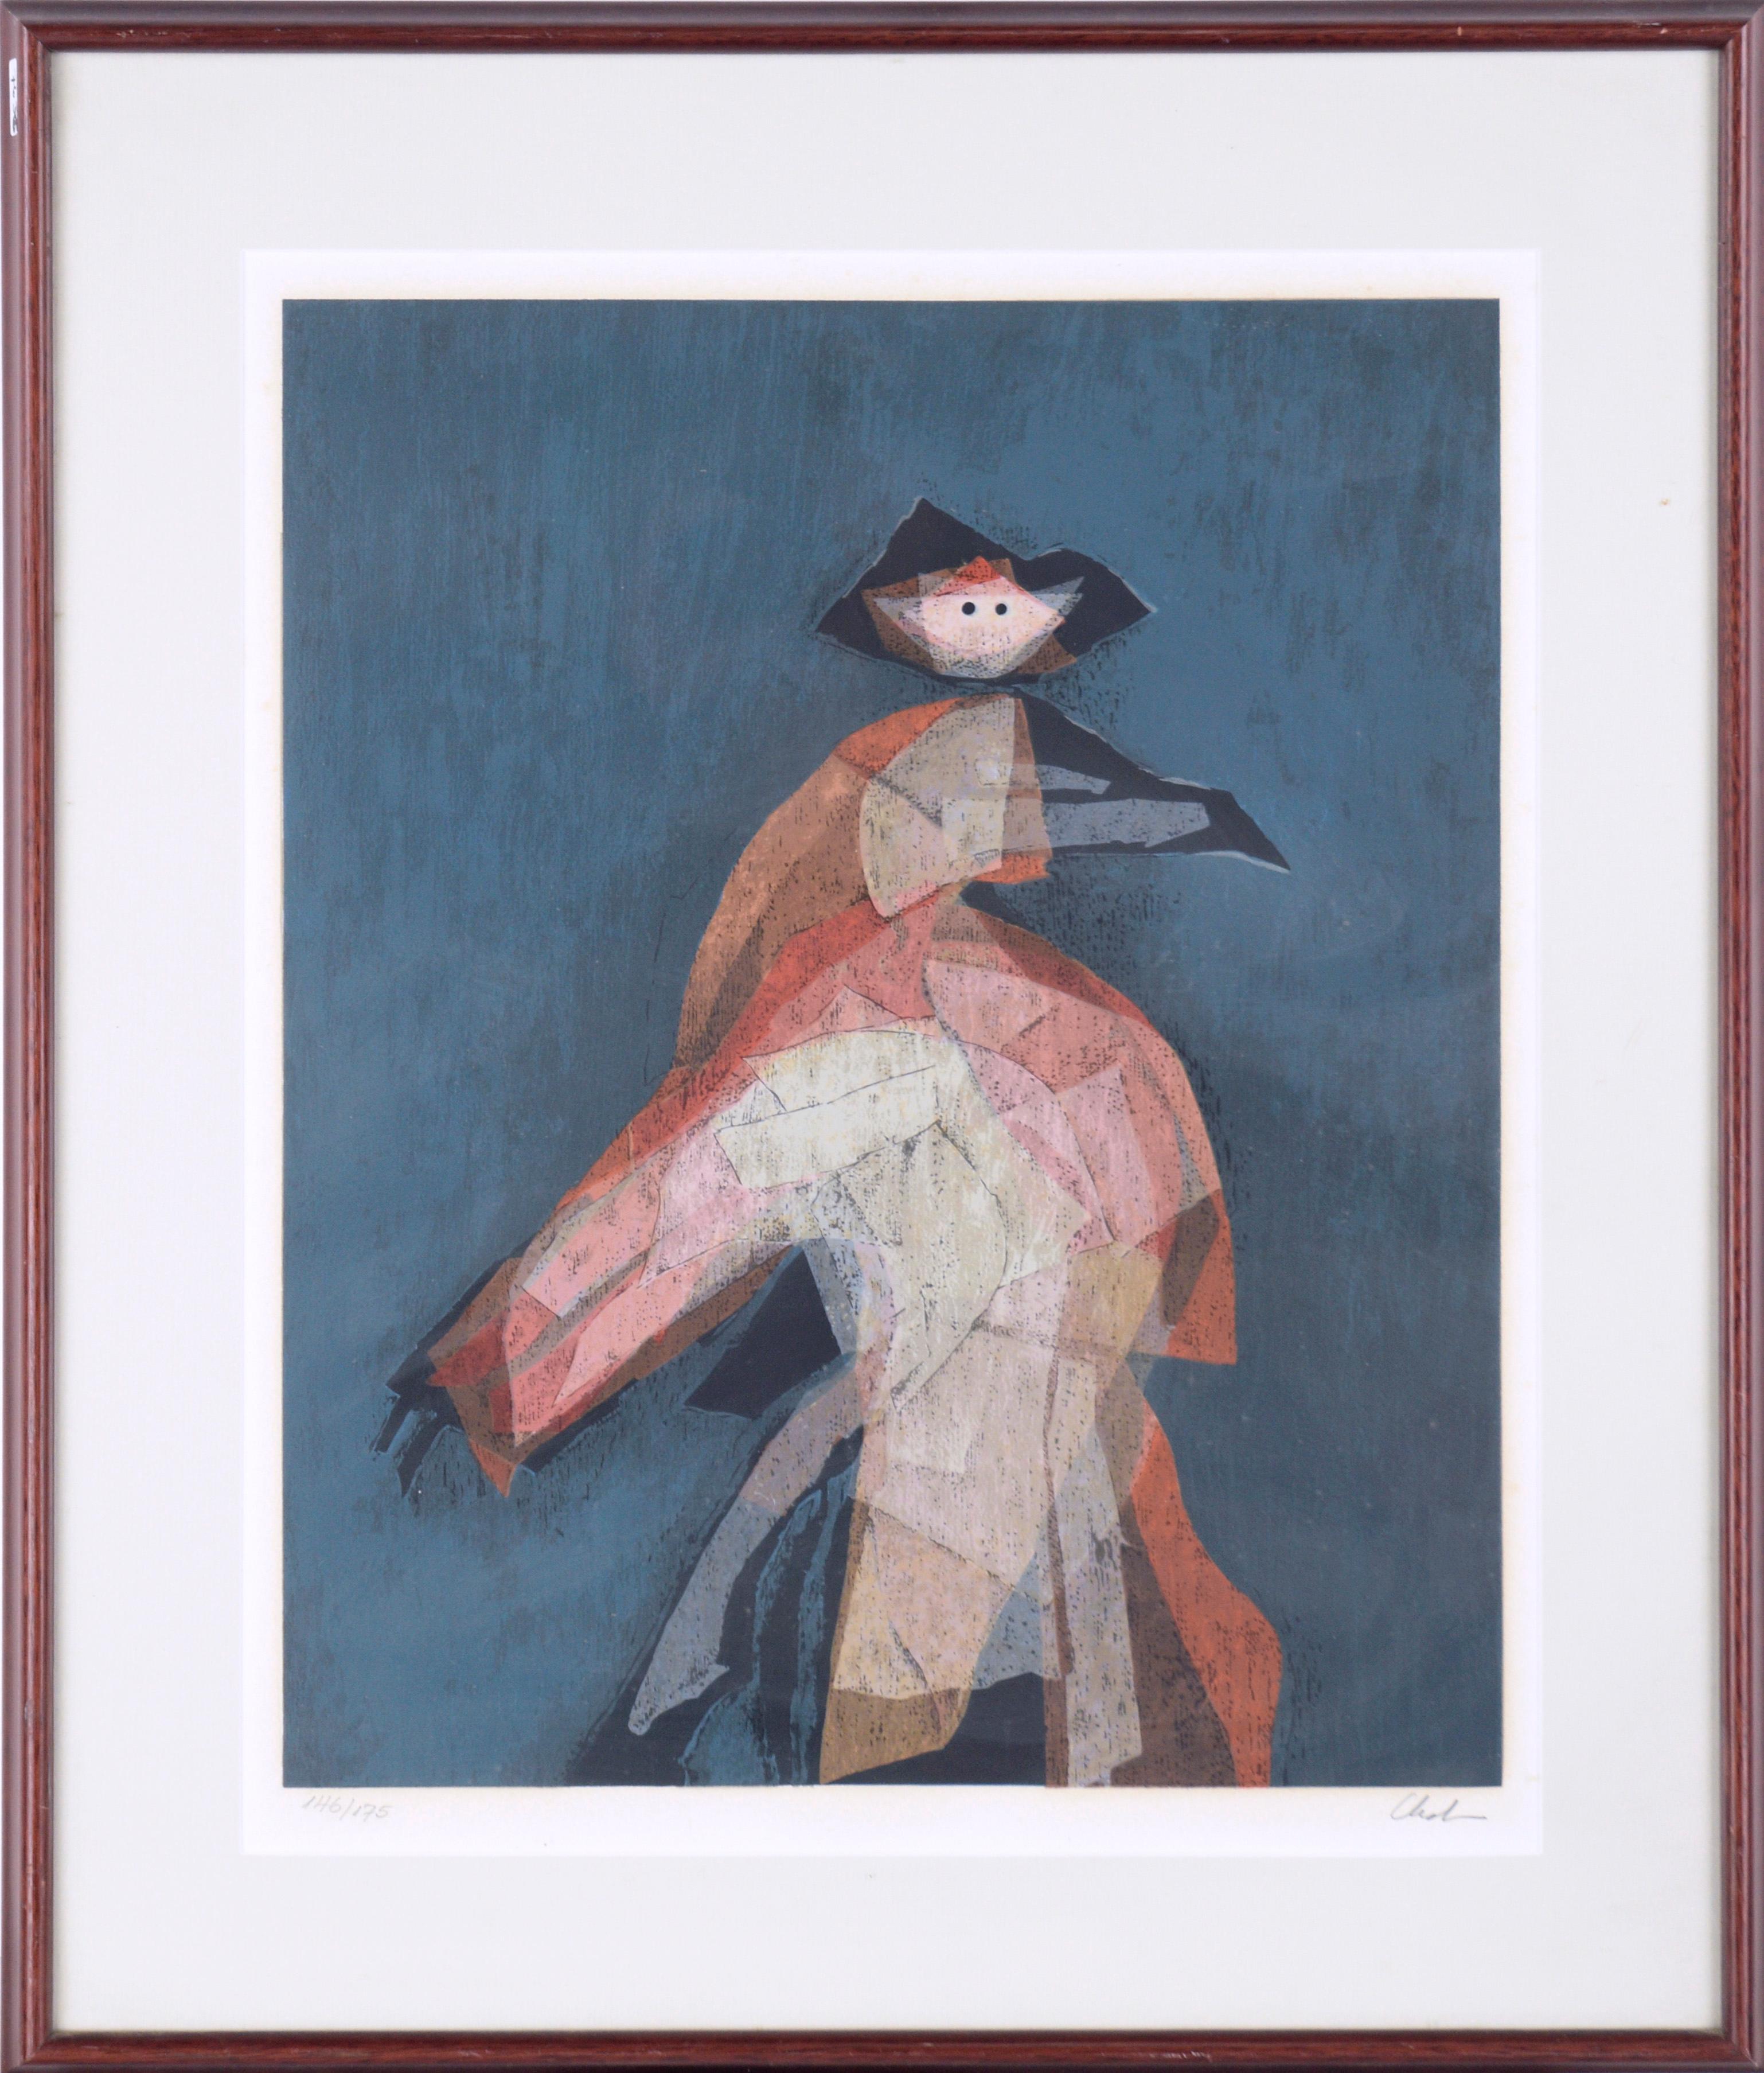 Victor Chab Figurative Print - "Personaje" (Character) - Abstracted Figurative Serigraph on Paper (#146/175)